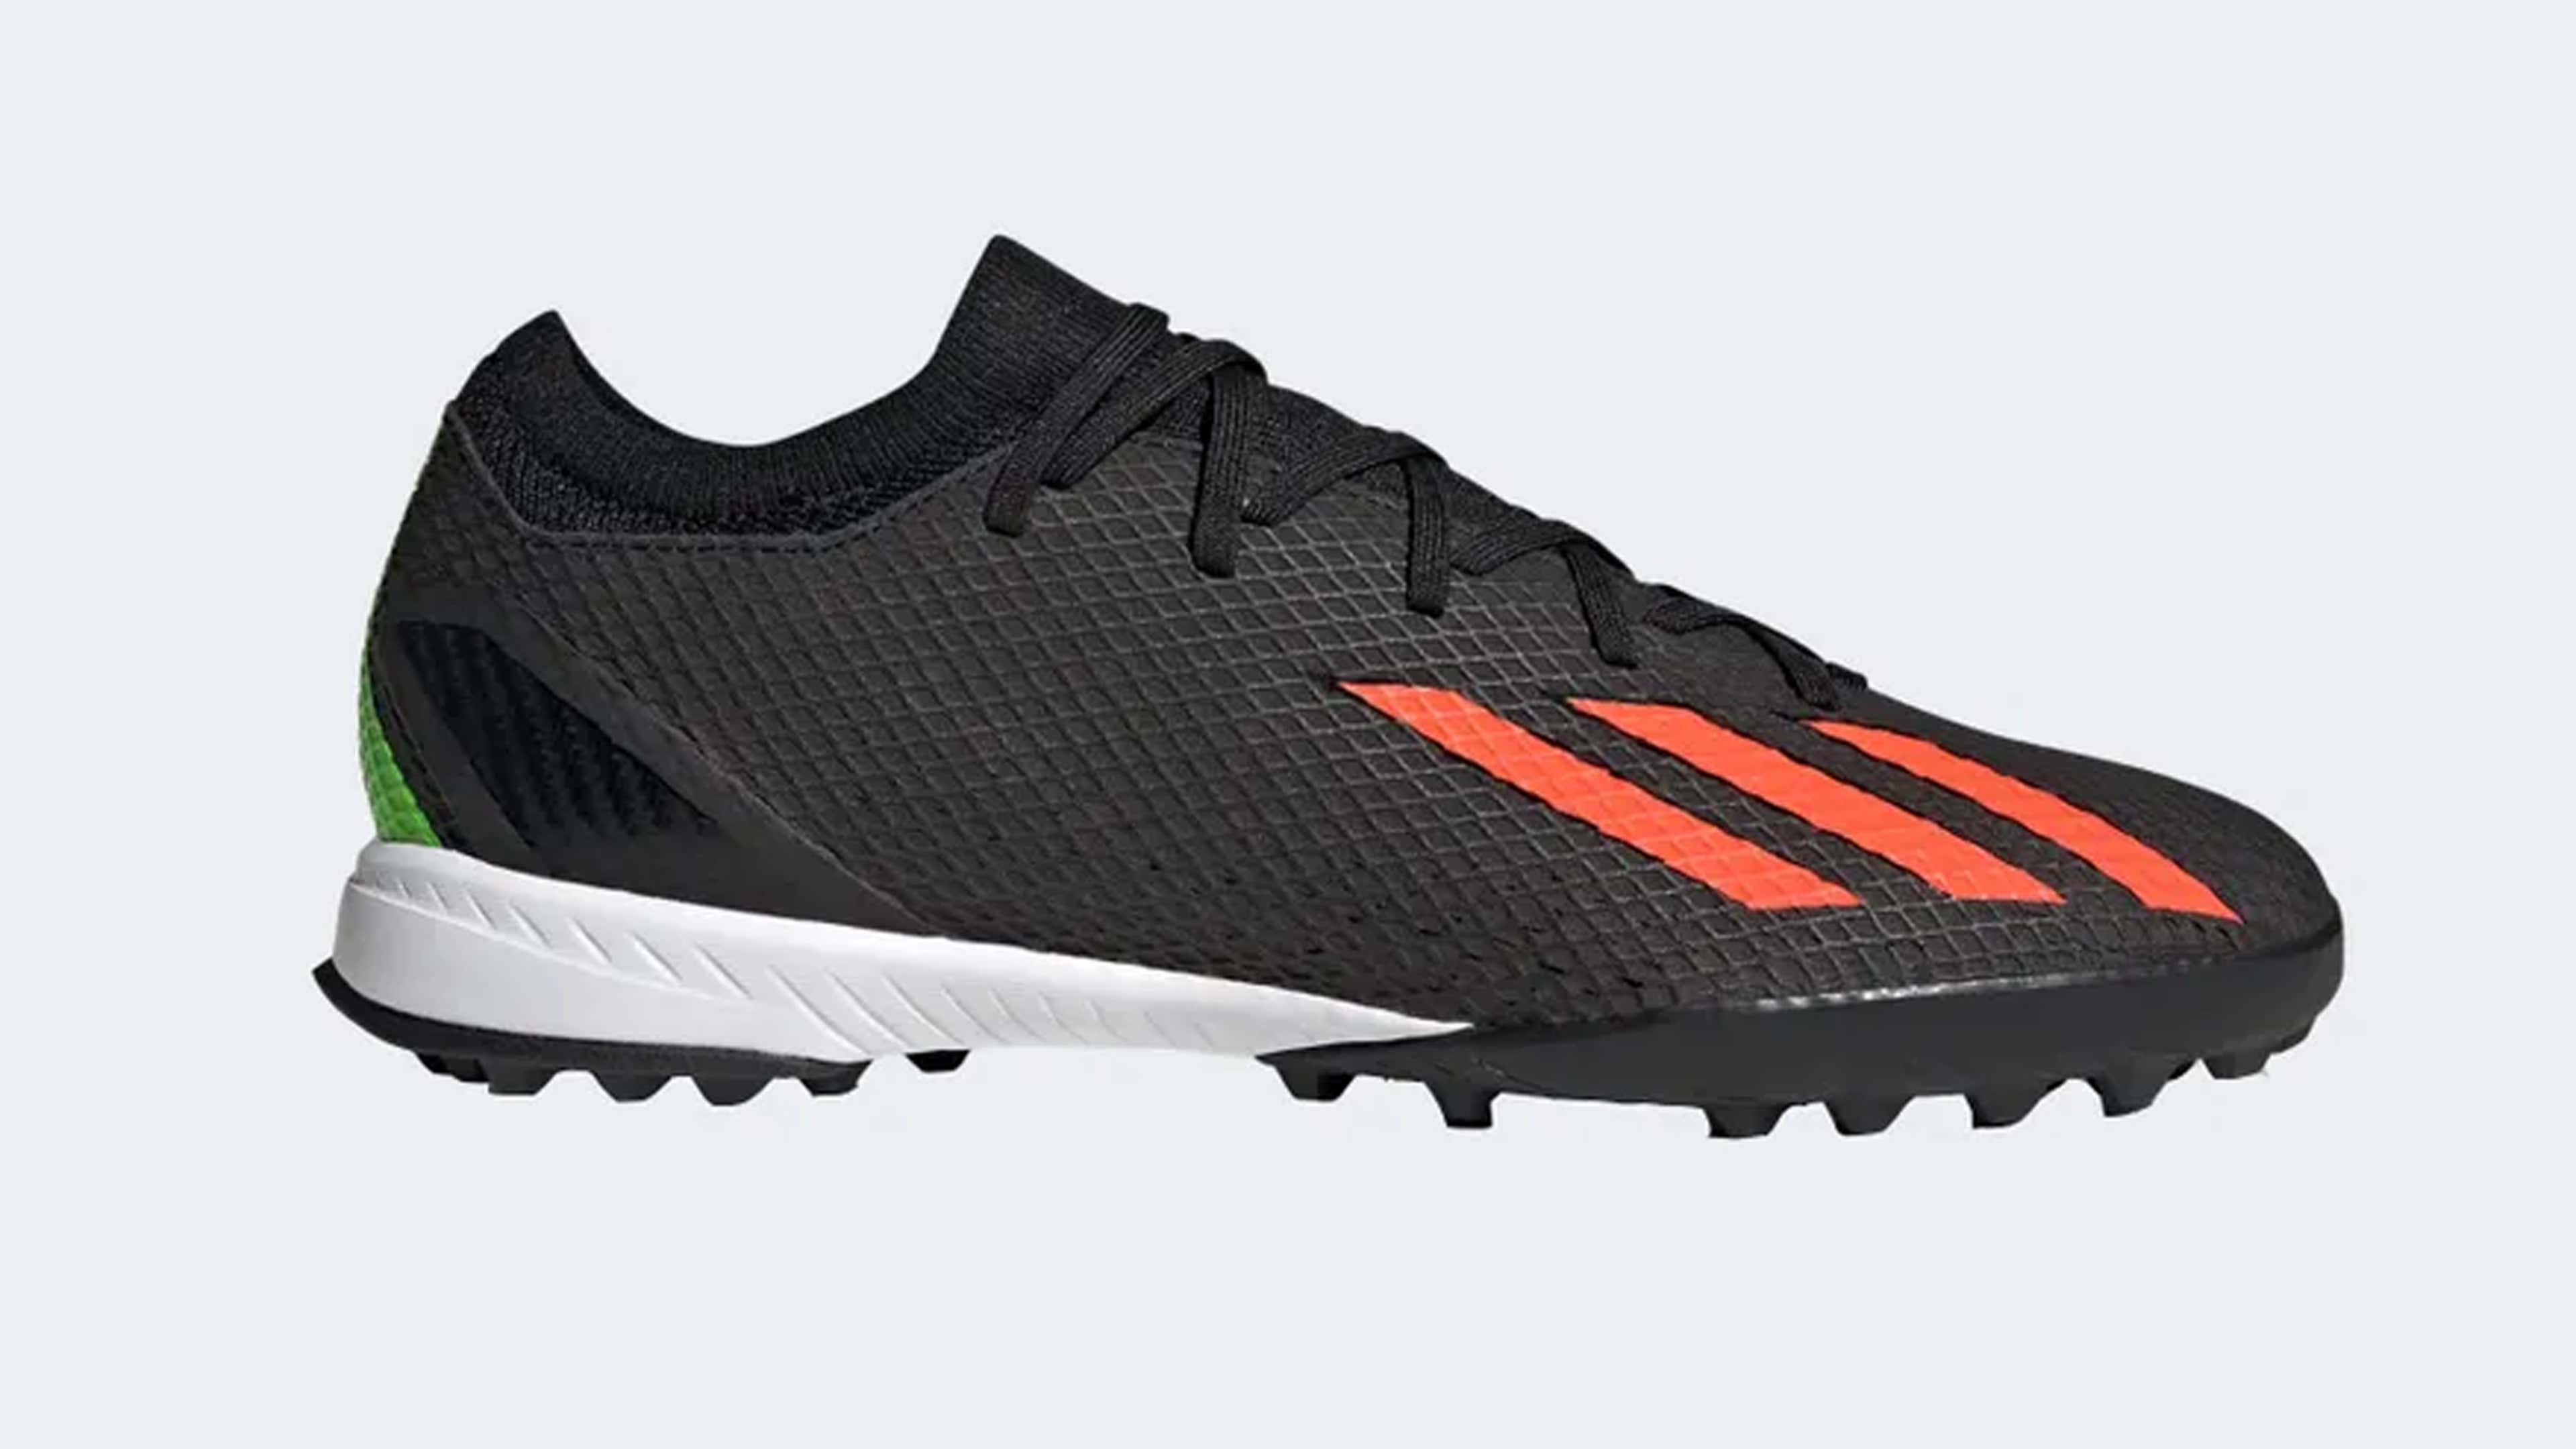 The best adidas football boots you can buy in 2023